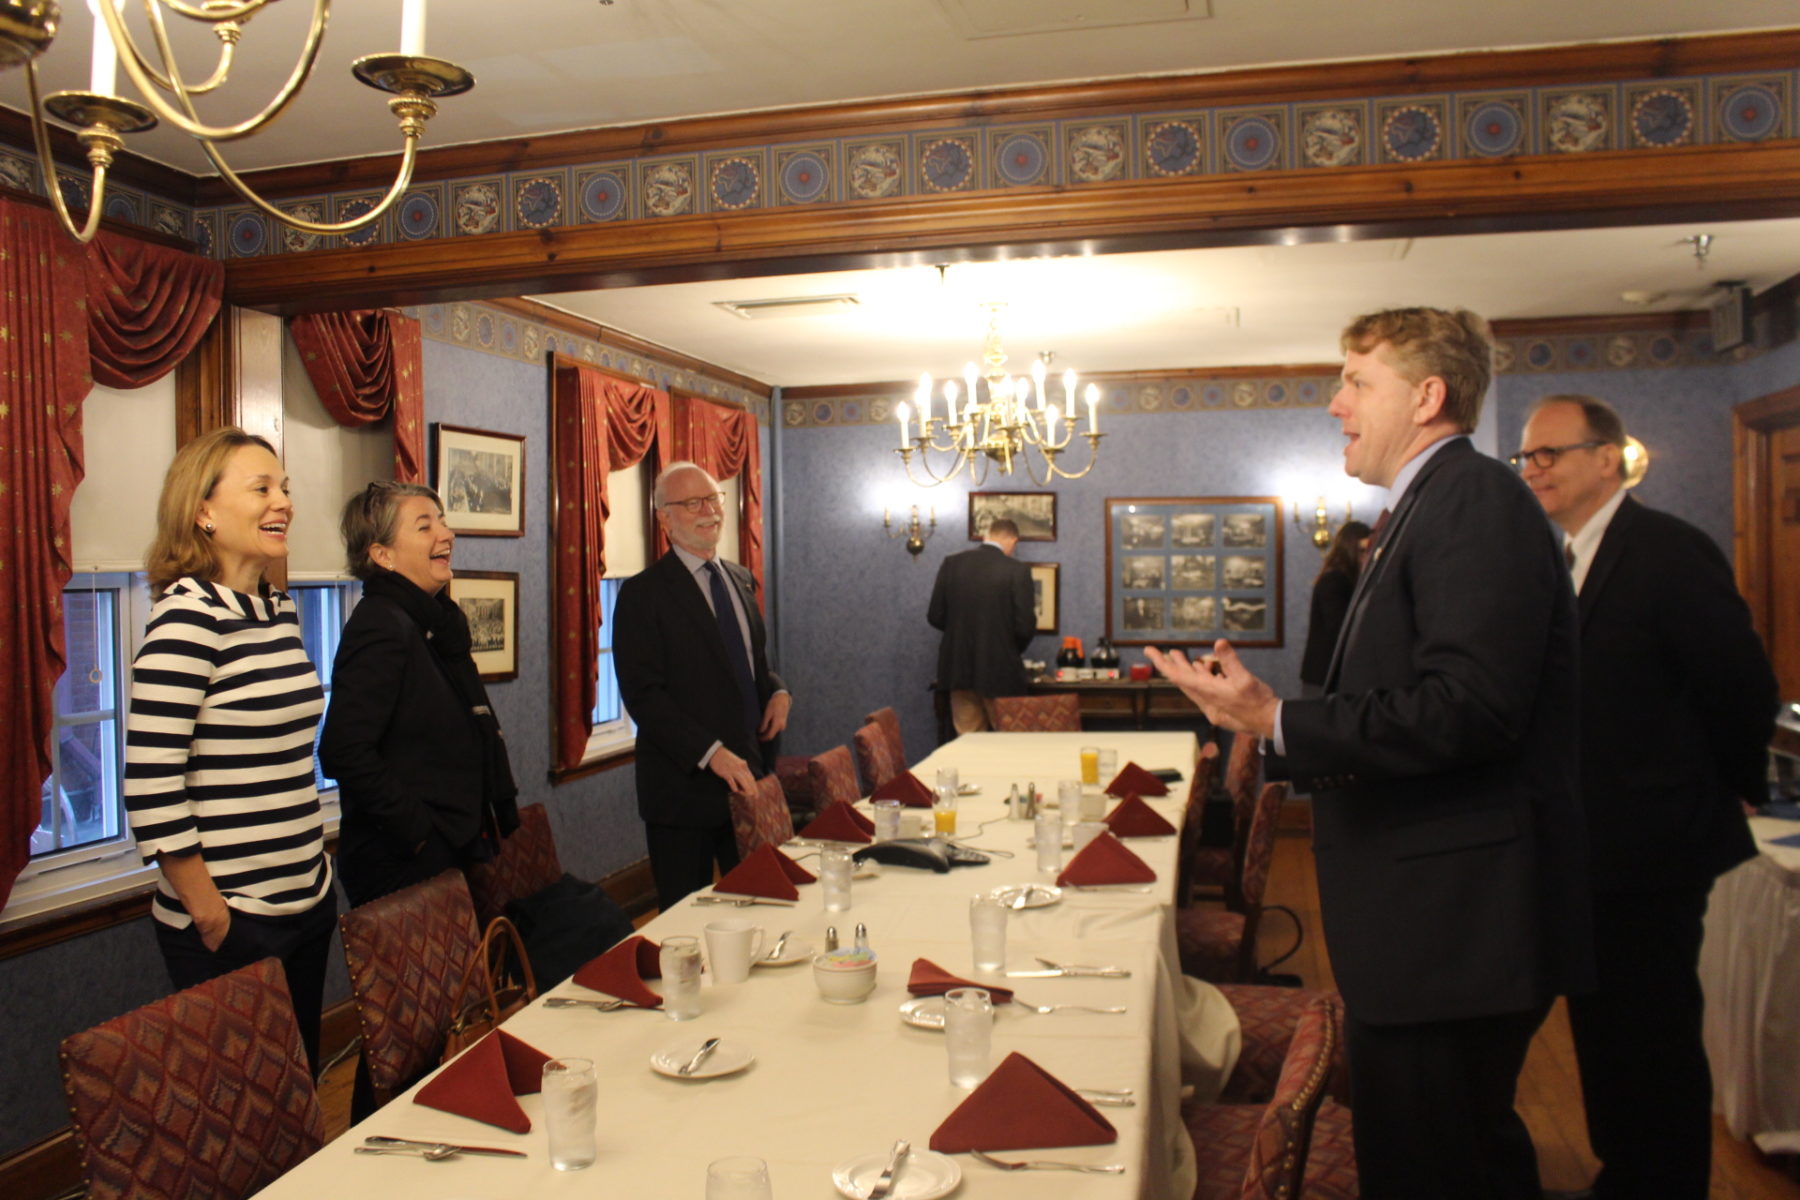 October 20- the Across the Pond, in the Field team has breakfast with Pittsburgh’s Honorary German Consul, Paul Overby.